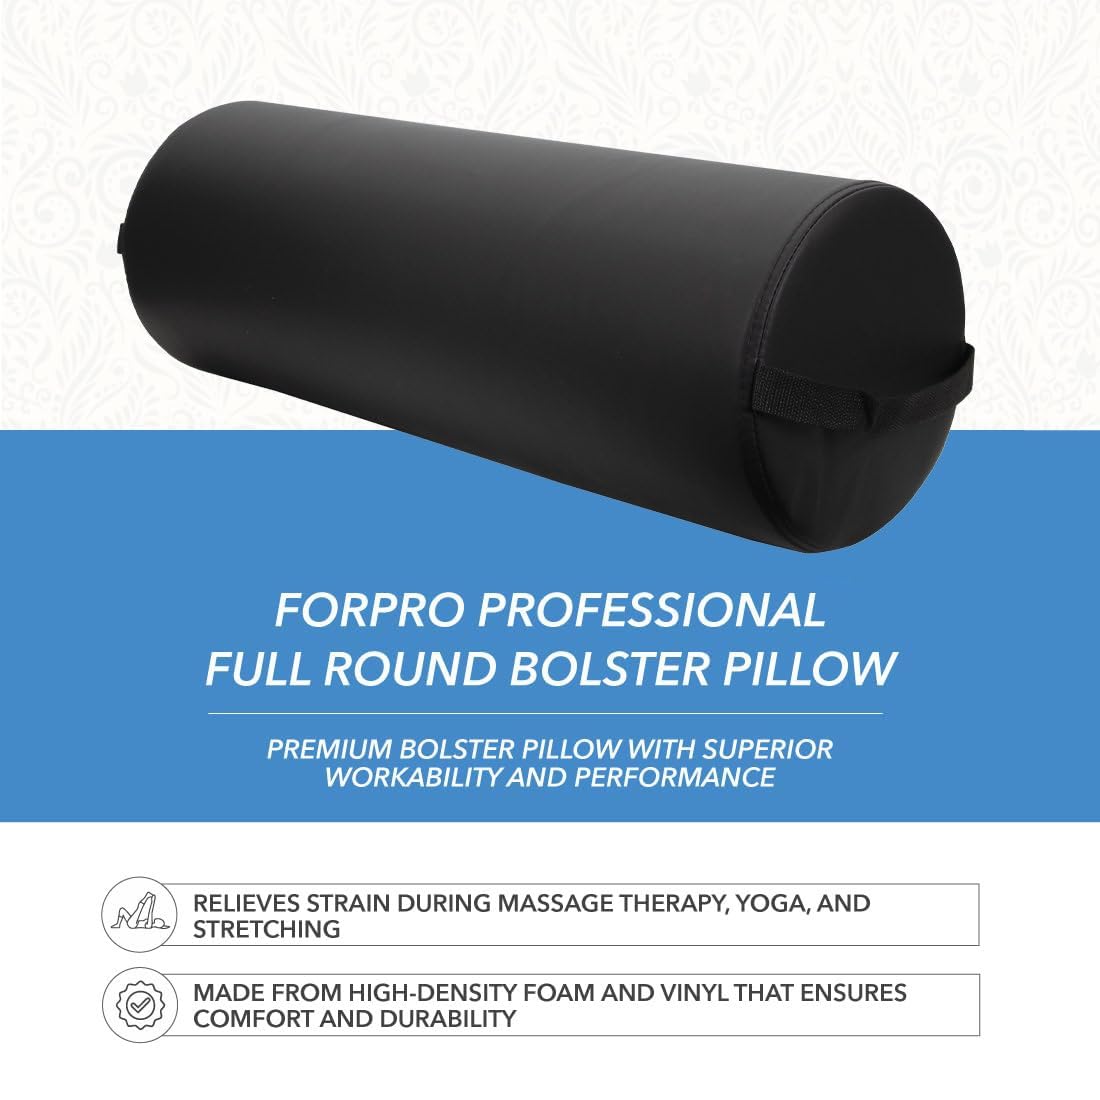 ForPro Jumbo Full Round Bolster Pillow, Black, Oil and Stain-Resistant, for Massage and Yoga, 9” R x 26” L